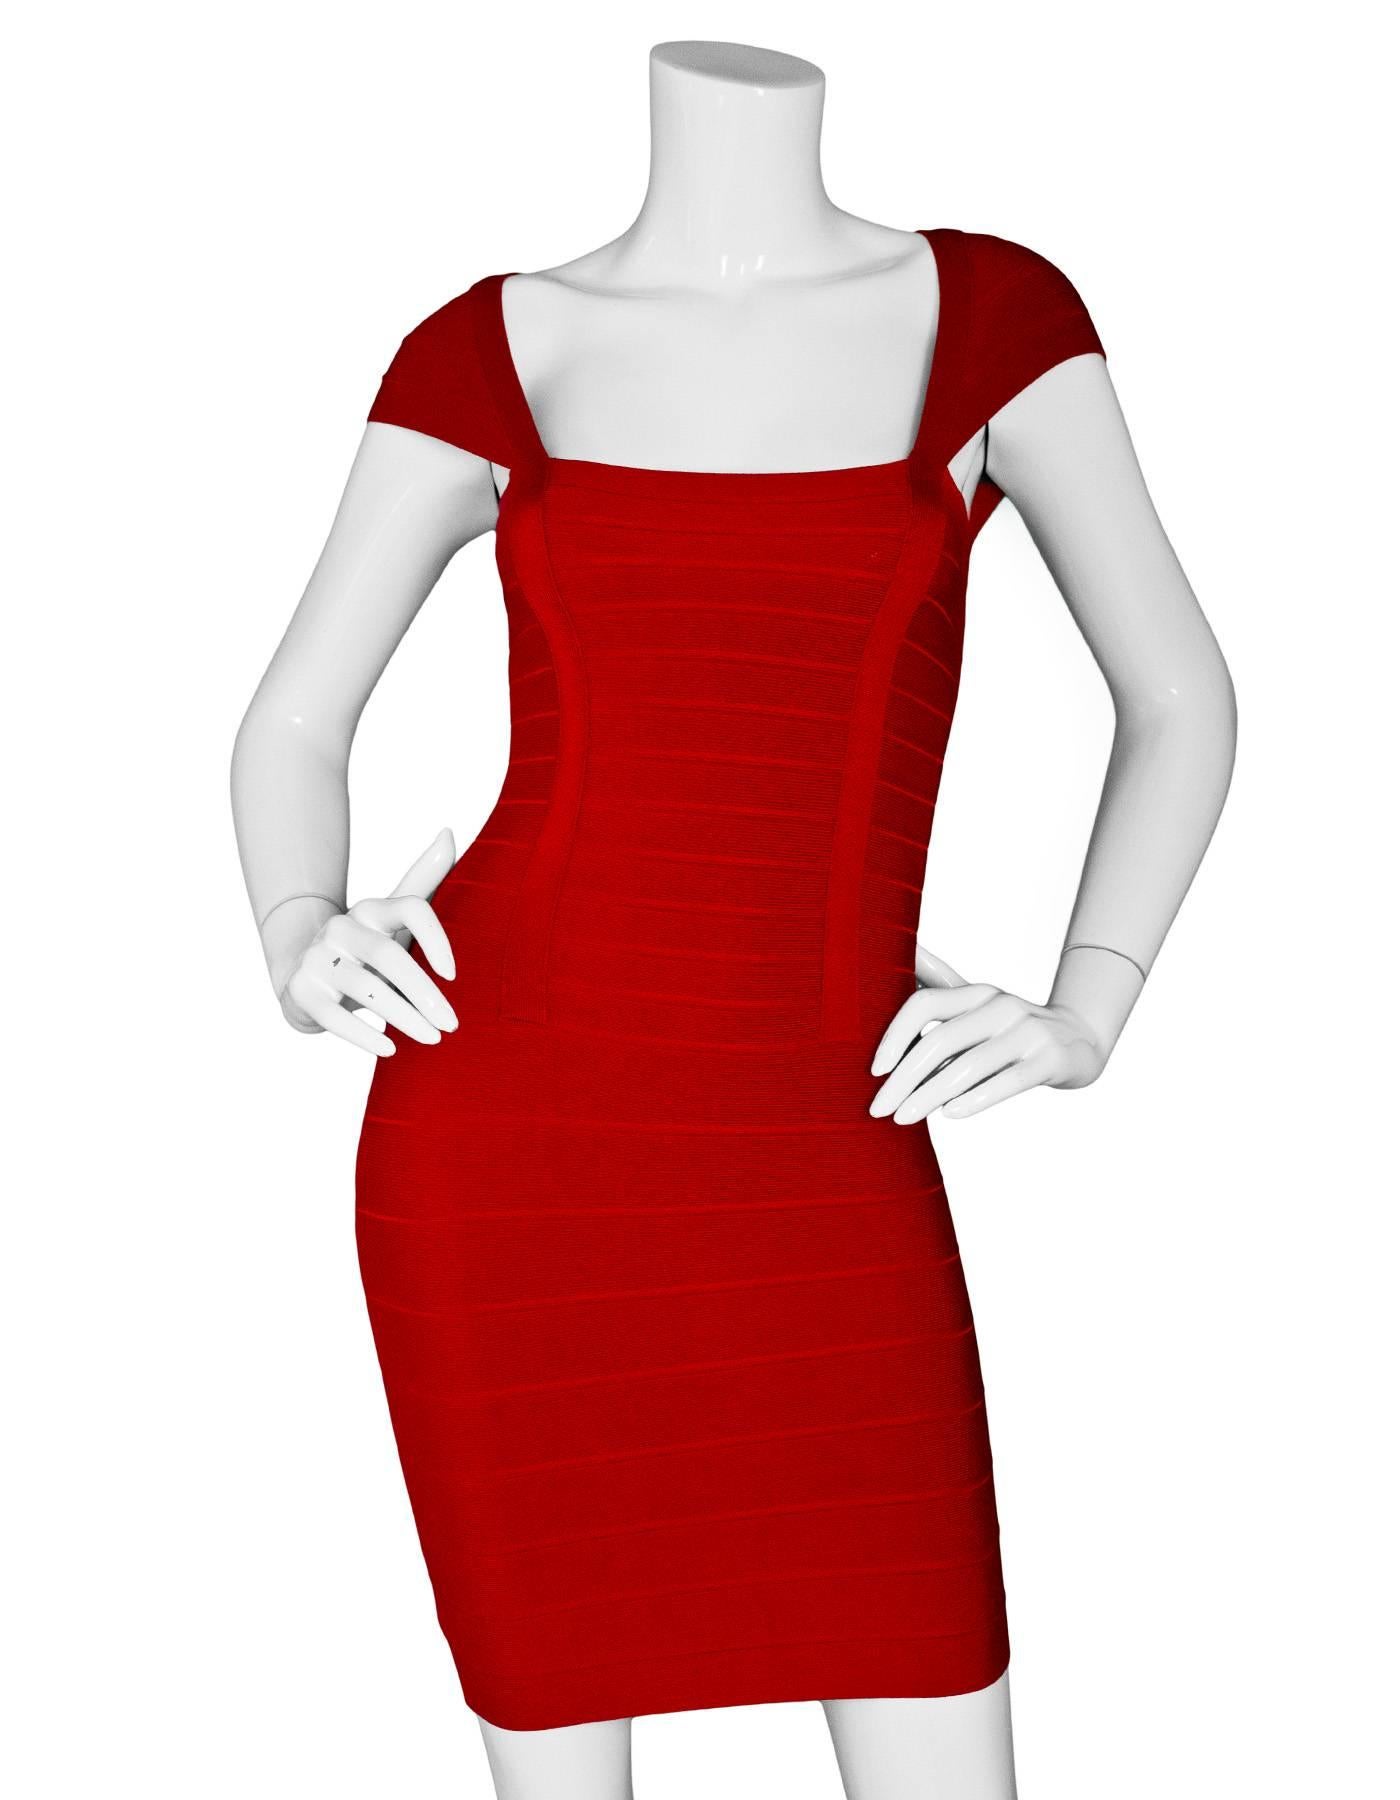 Herve Leger Red Bandage Dress Sz S

Made In: China
Color: Red
Composition: 90% Rayon, 9% Nylon, 1% Spandex
Lining: None
Closure/Opening: Zip closure at back
Exterior Pockets: None
Interior Pockets: None
Overall Conditon: Excellent pre-owned